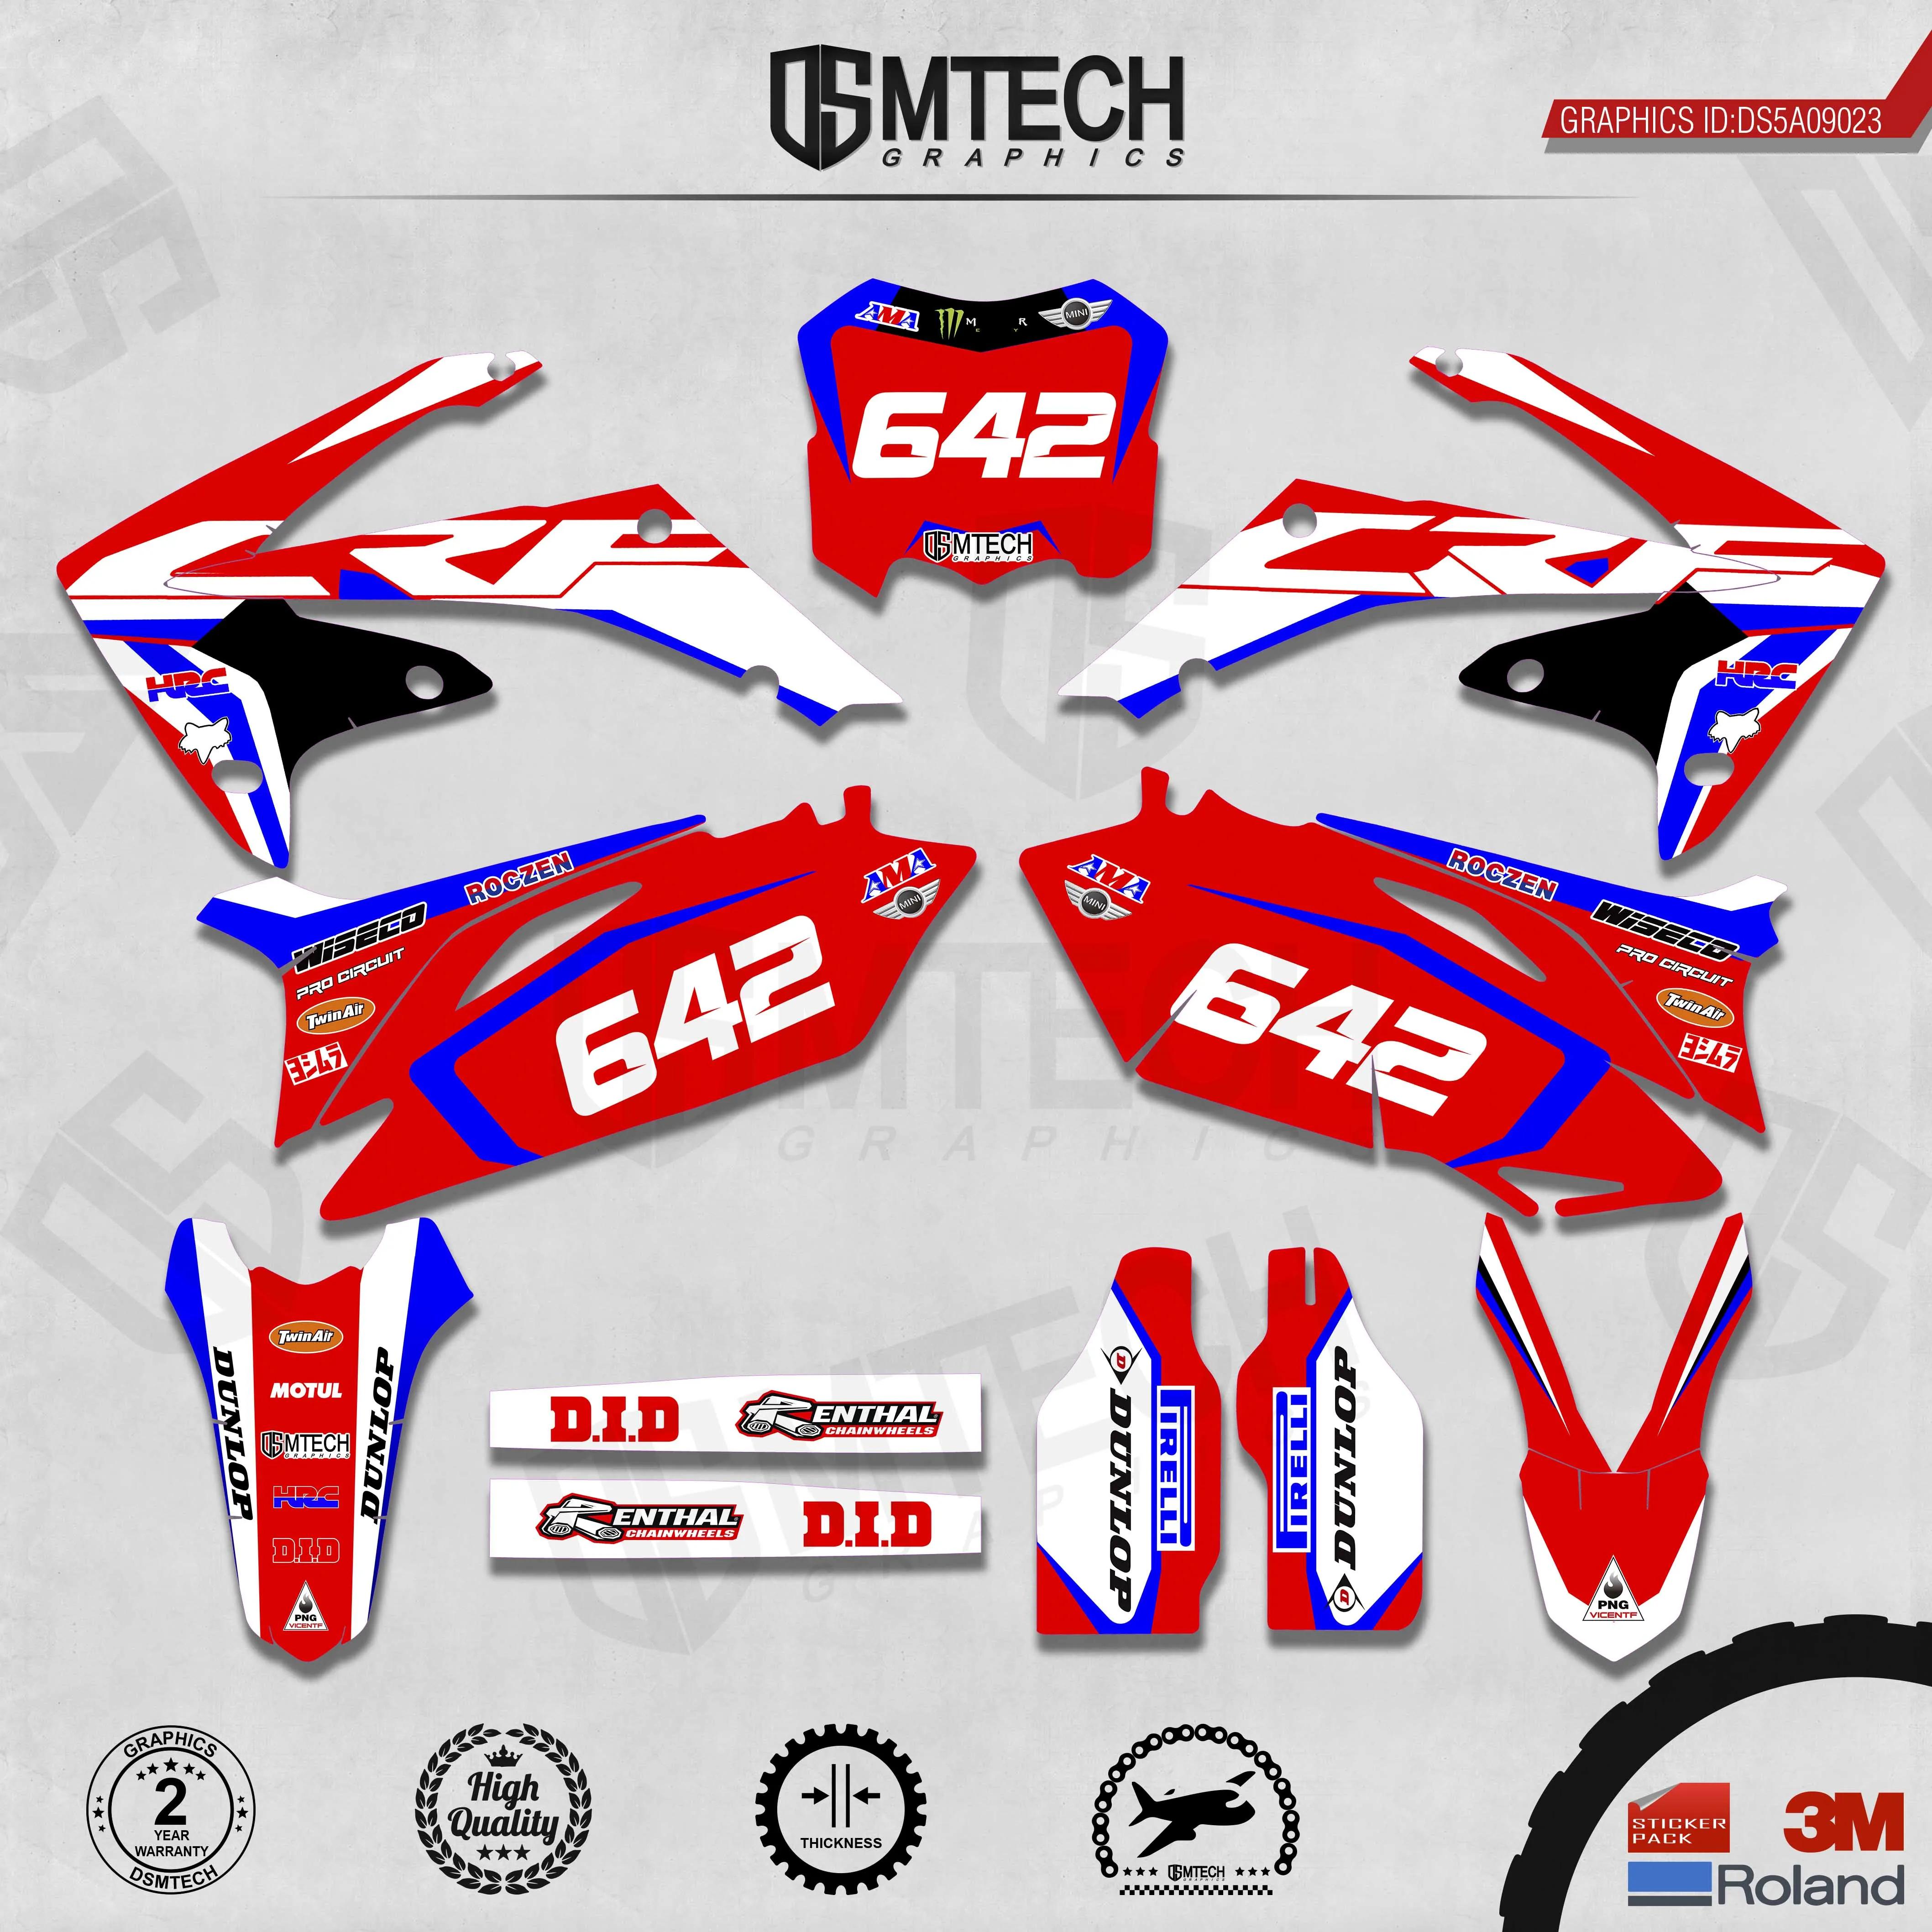 DSMTECH Customized Team Graphics Backgrounds Decals 3M Custom Stickers For 2010-2013 CRF250R 2009-2012 CRF450R 023